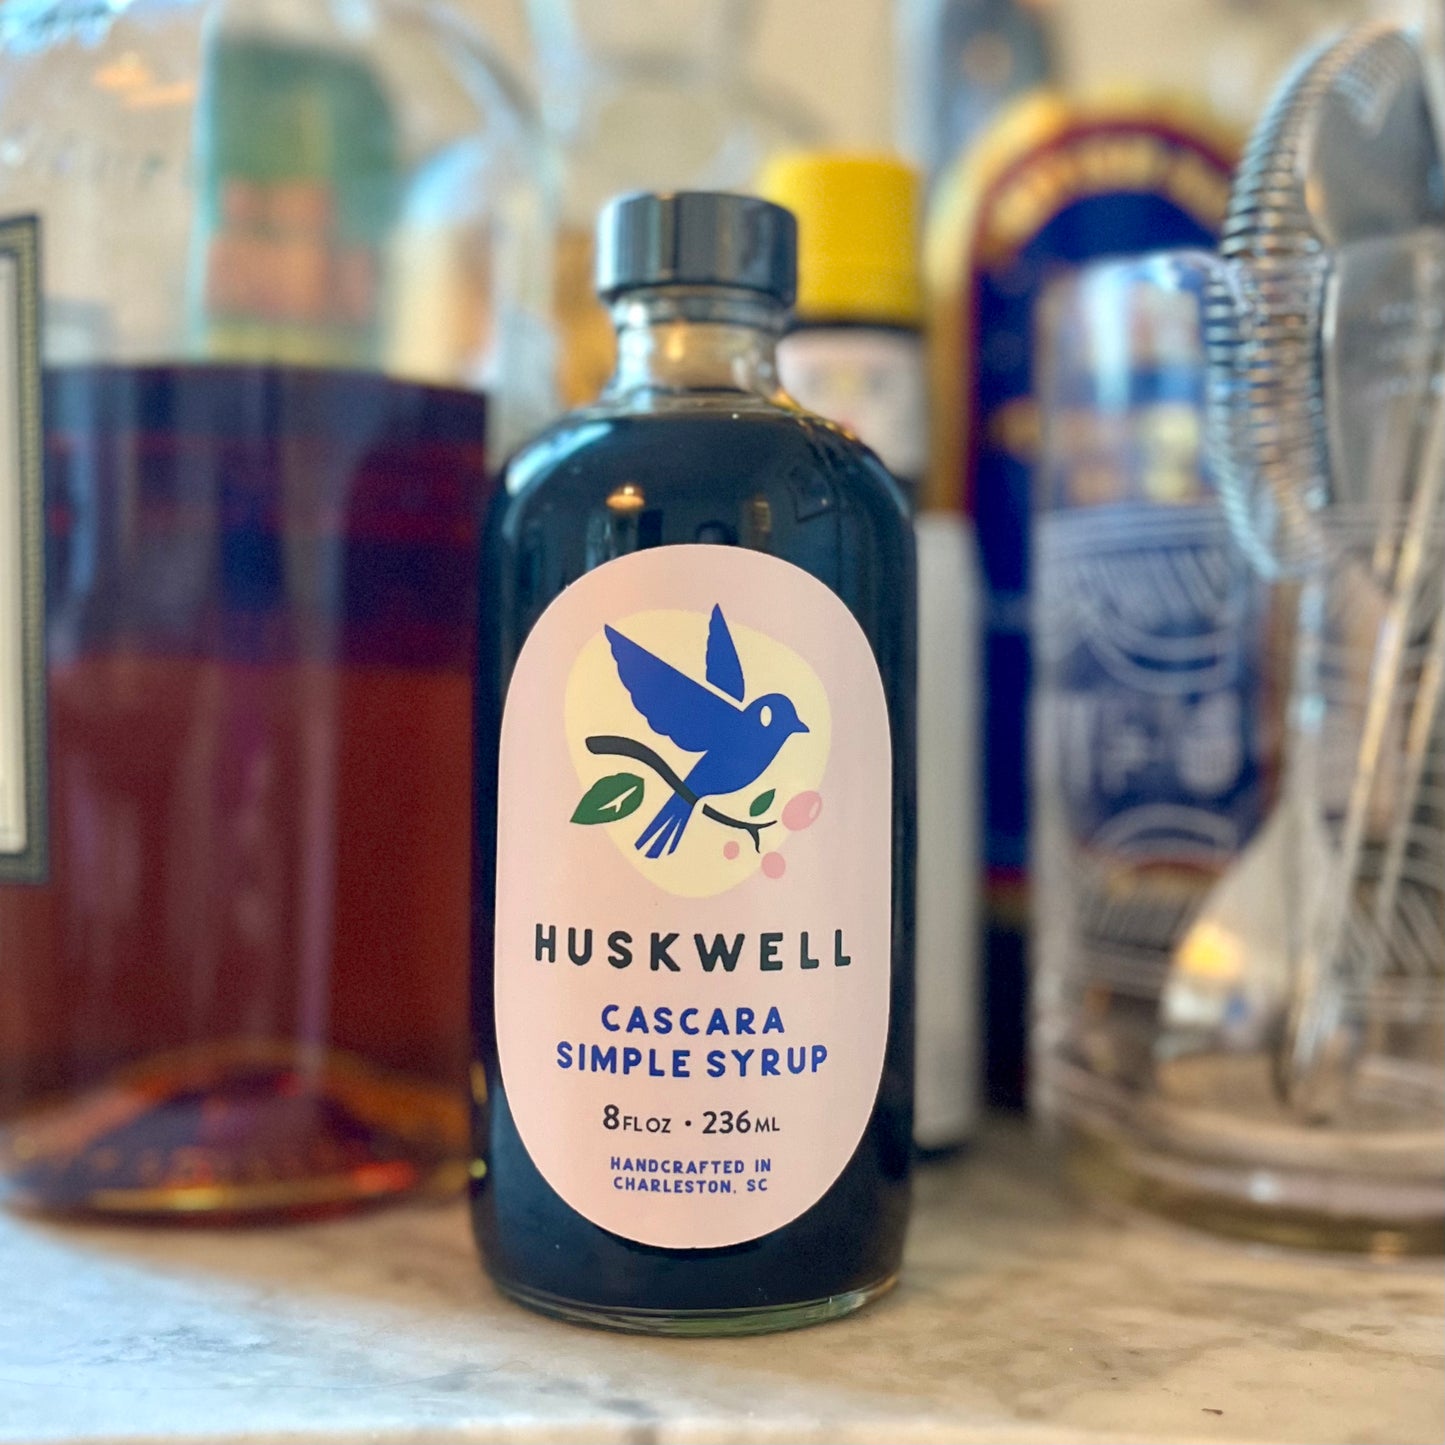 Huskwell Cascara Simple Syrup